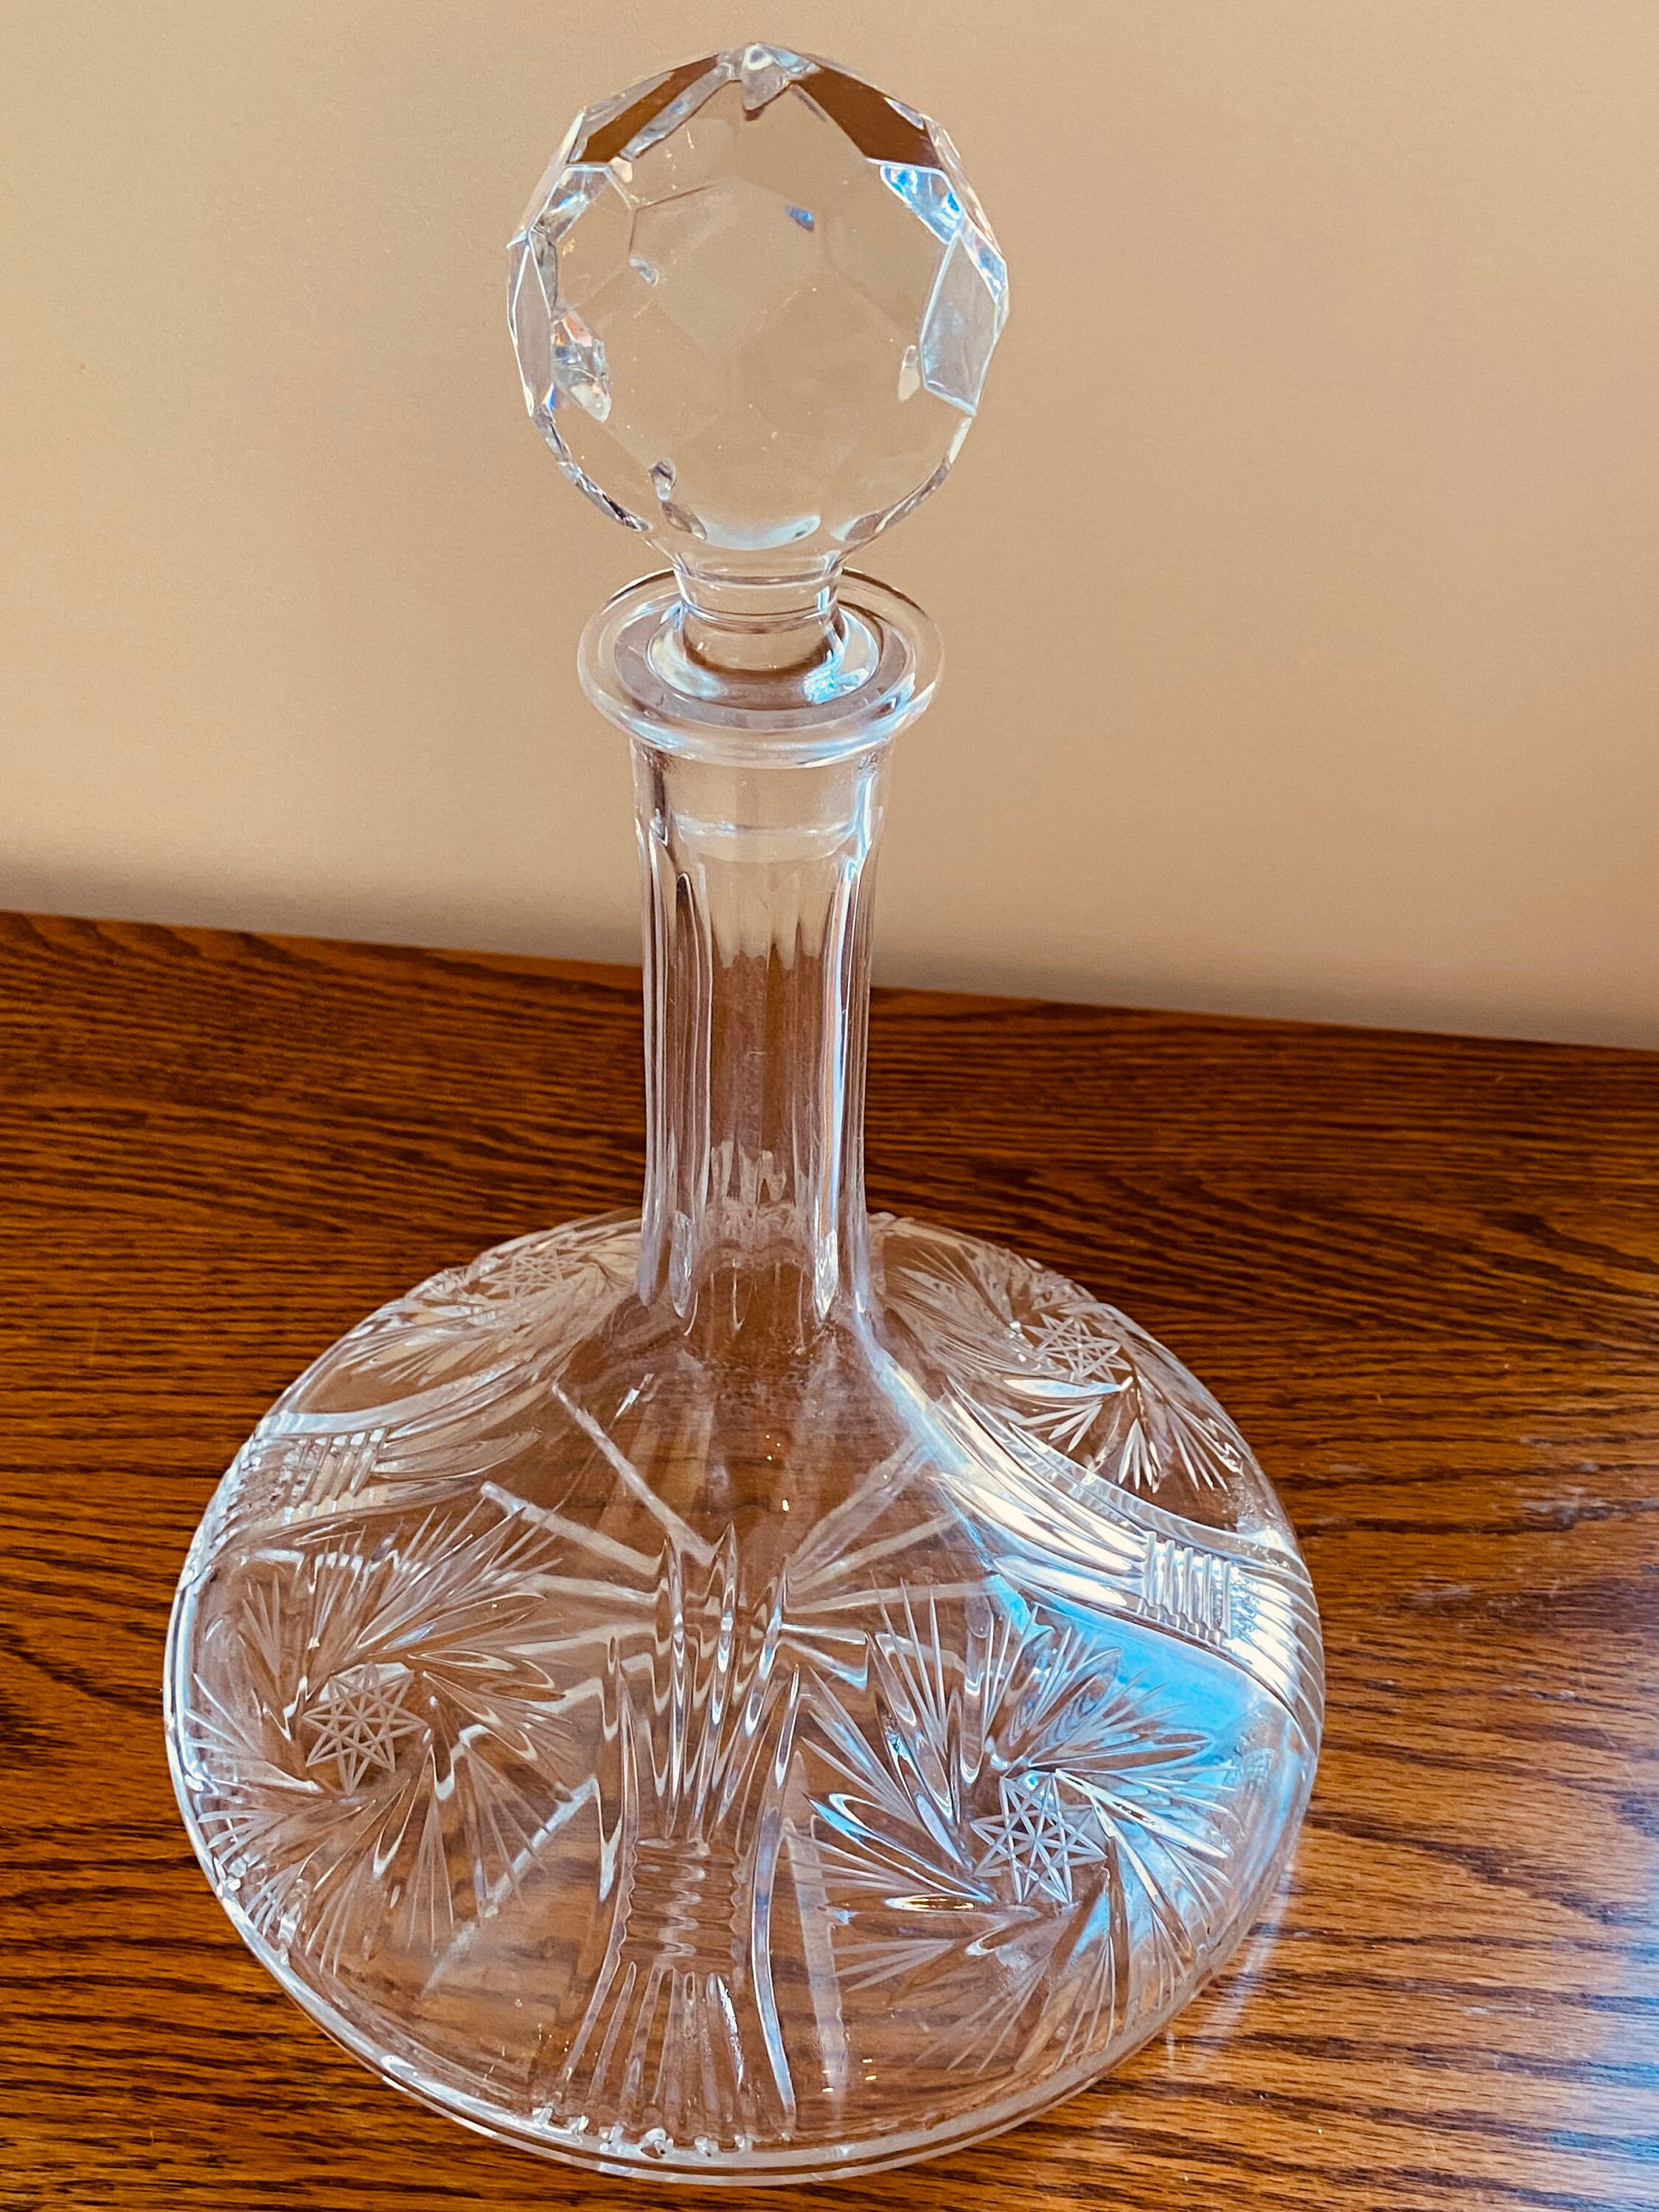 Lead in antique crystal decanters : dangerous or not? — FUTURE KING & QUEEN